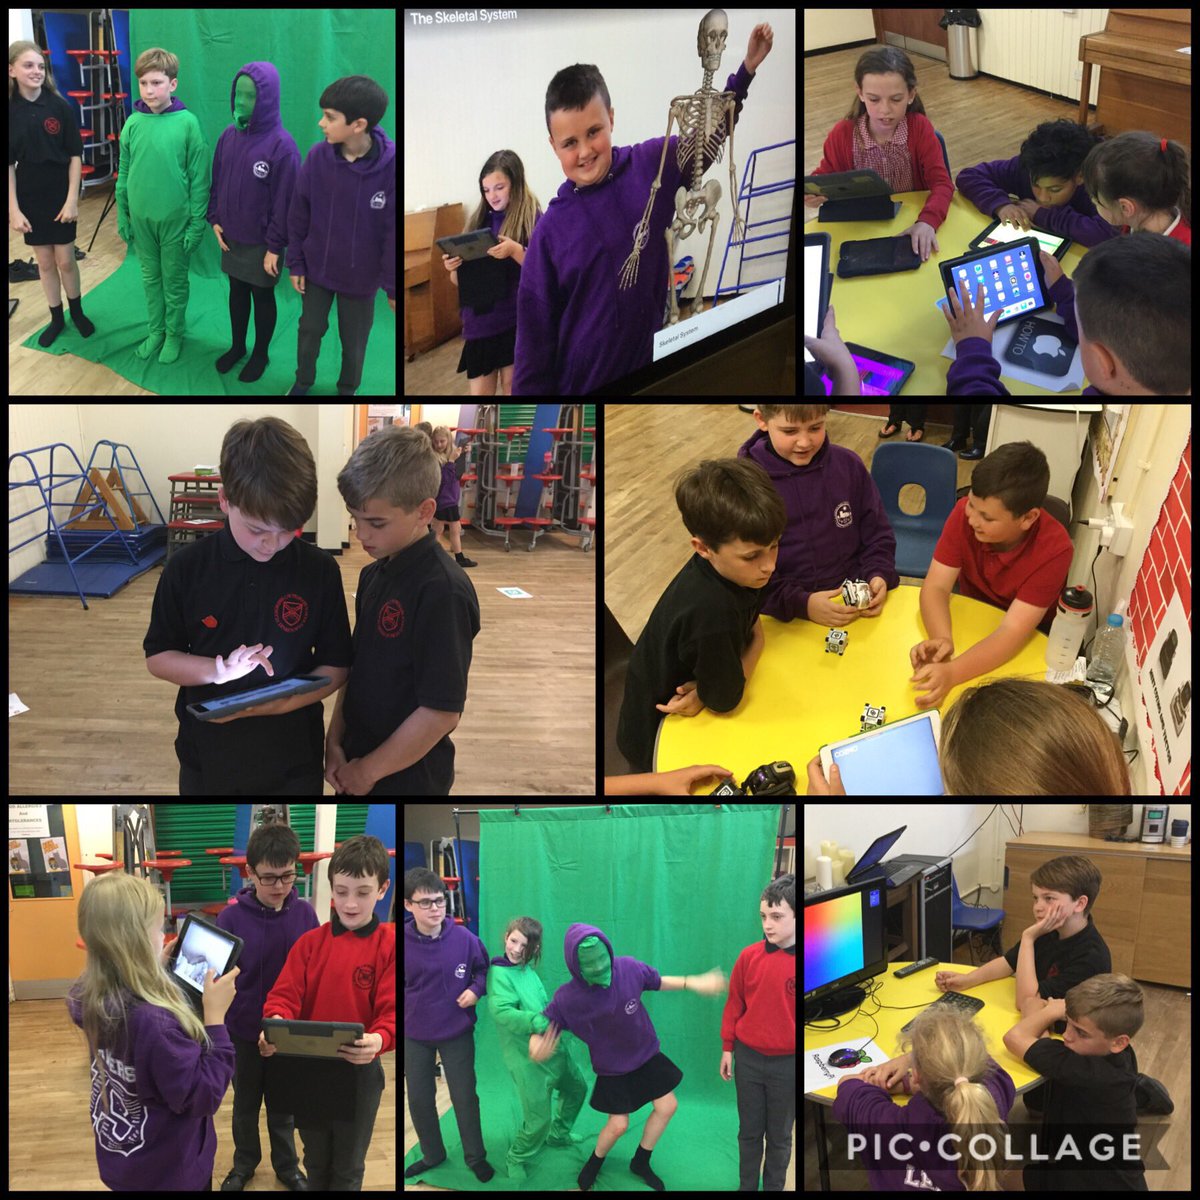 Lots of fun had this afternoon discovering new technology and putting their ICT skills to the test! Fantastic workshops led by the Digital Leaders! DA IAWN ‘Saint Andrew’s Software Surfers’ 😃#samsdigitalleaders #samsICT